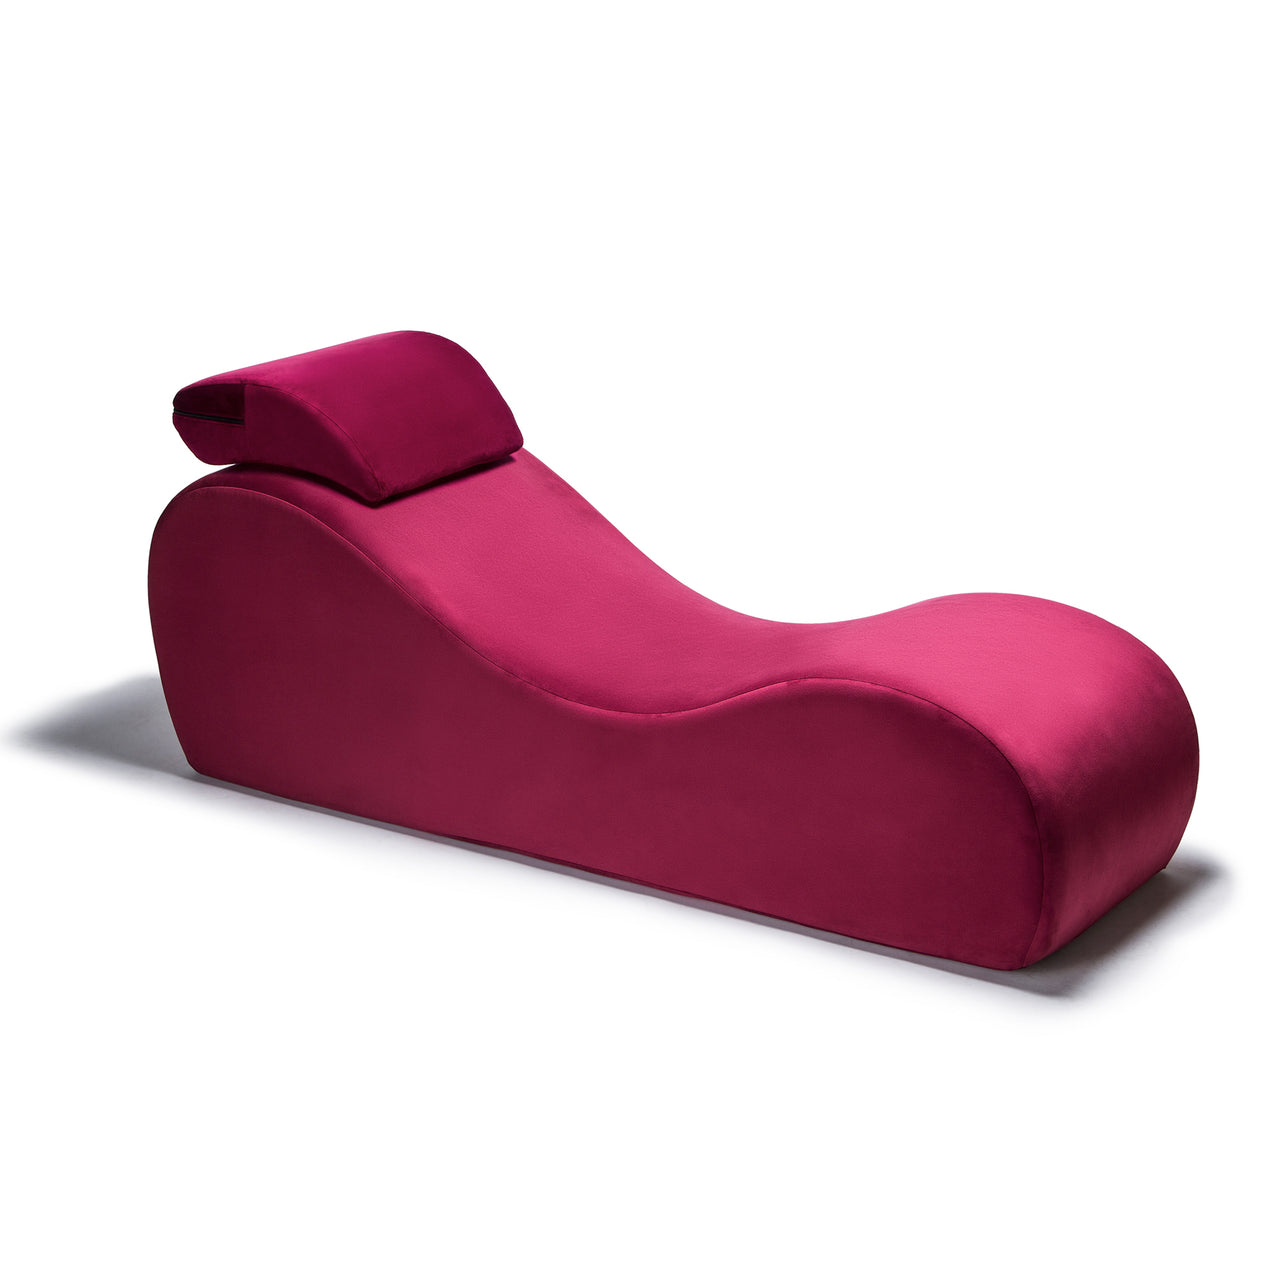 Liberator Esse Chaise Sex Lounger